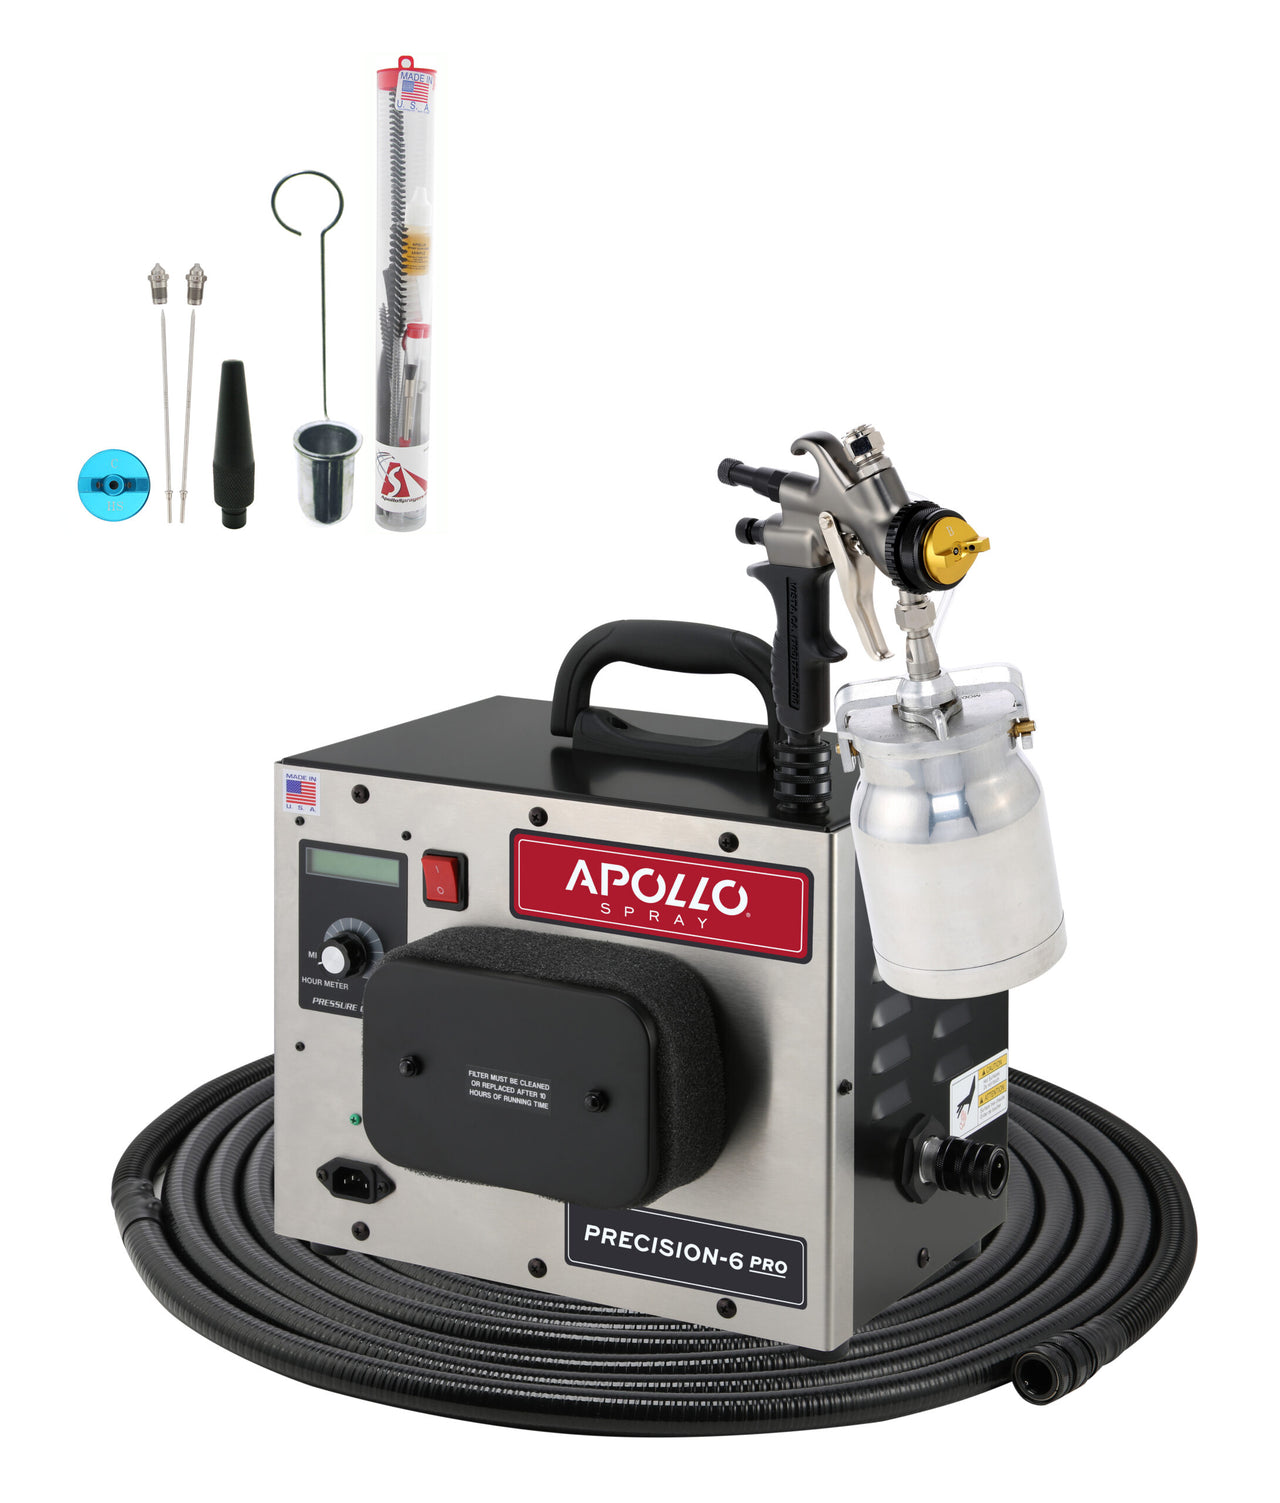 Apollo HVLP Precision-6 PRO Turbo Paint Spray System - Plus Package Paint Life Supply Co